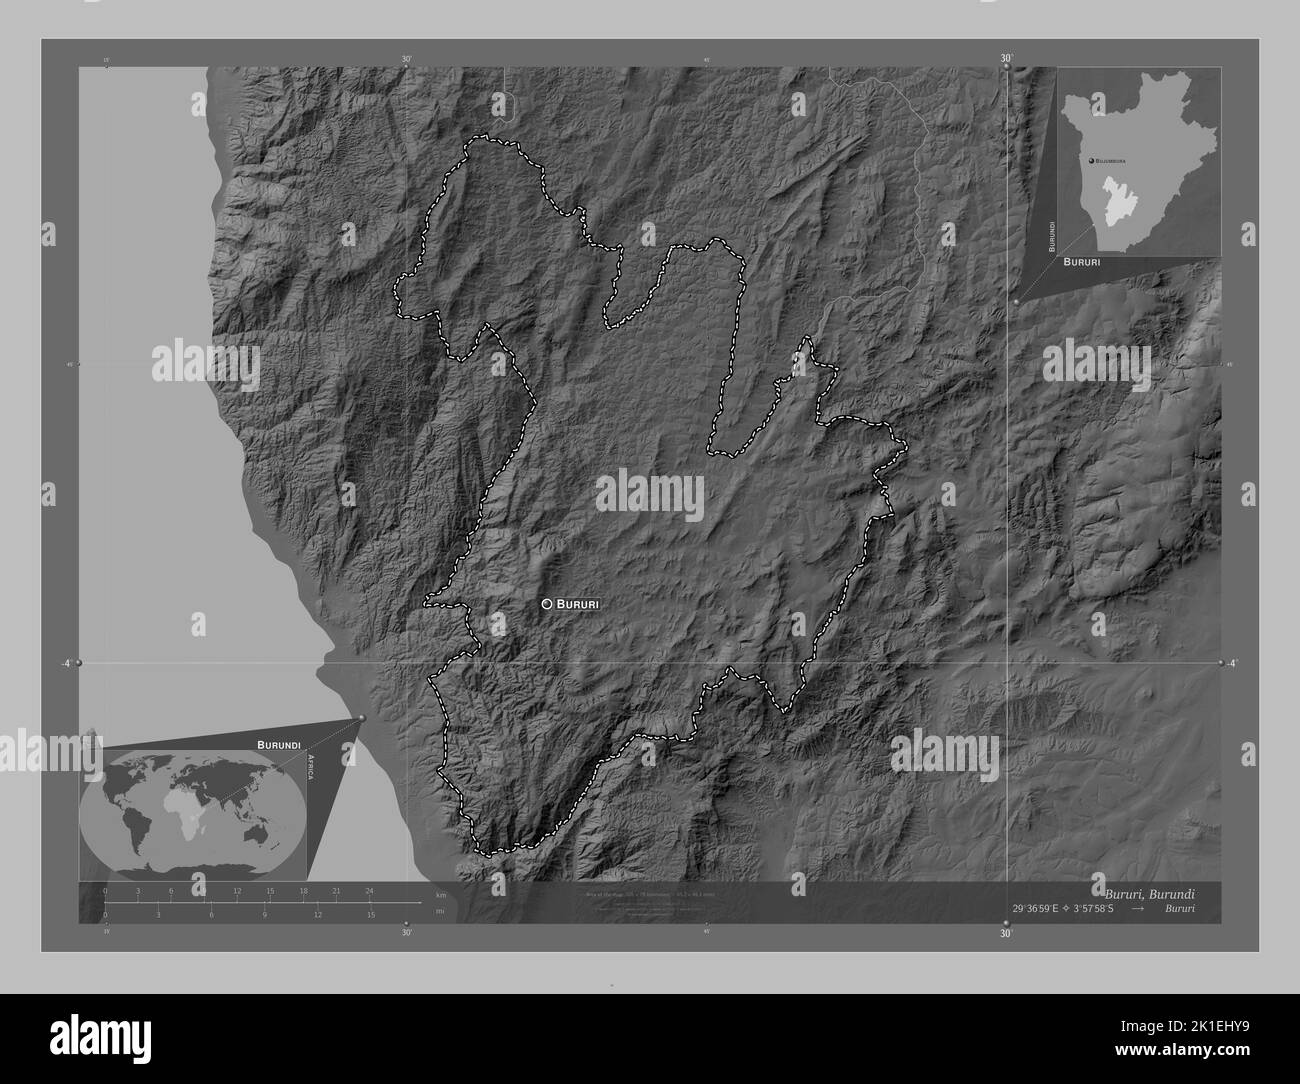 Bururi, province of Burundi. Grayscale elevation map with lakes and rivers. Locations and names of major cities of the region. Corner auxiliary locati Stock Photo